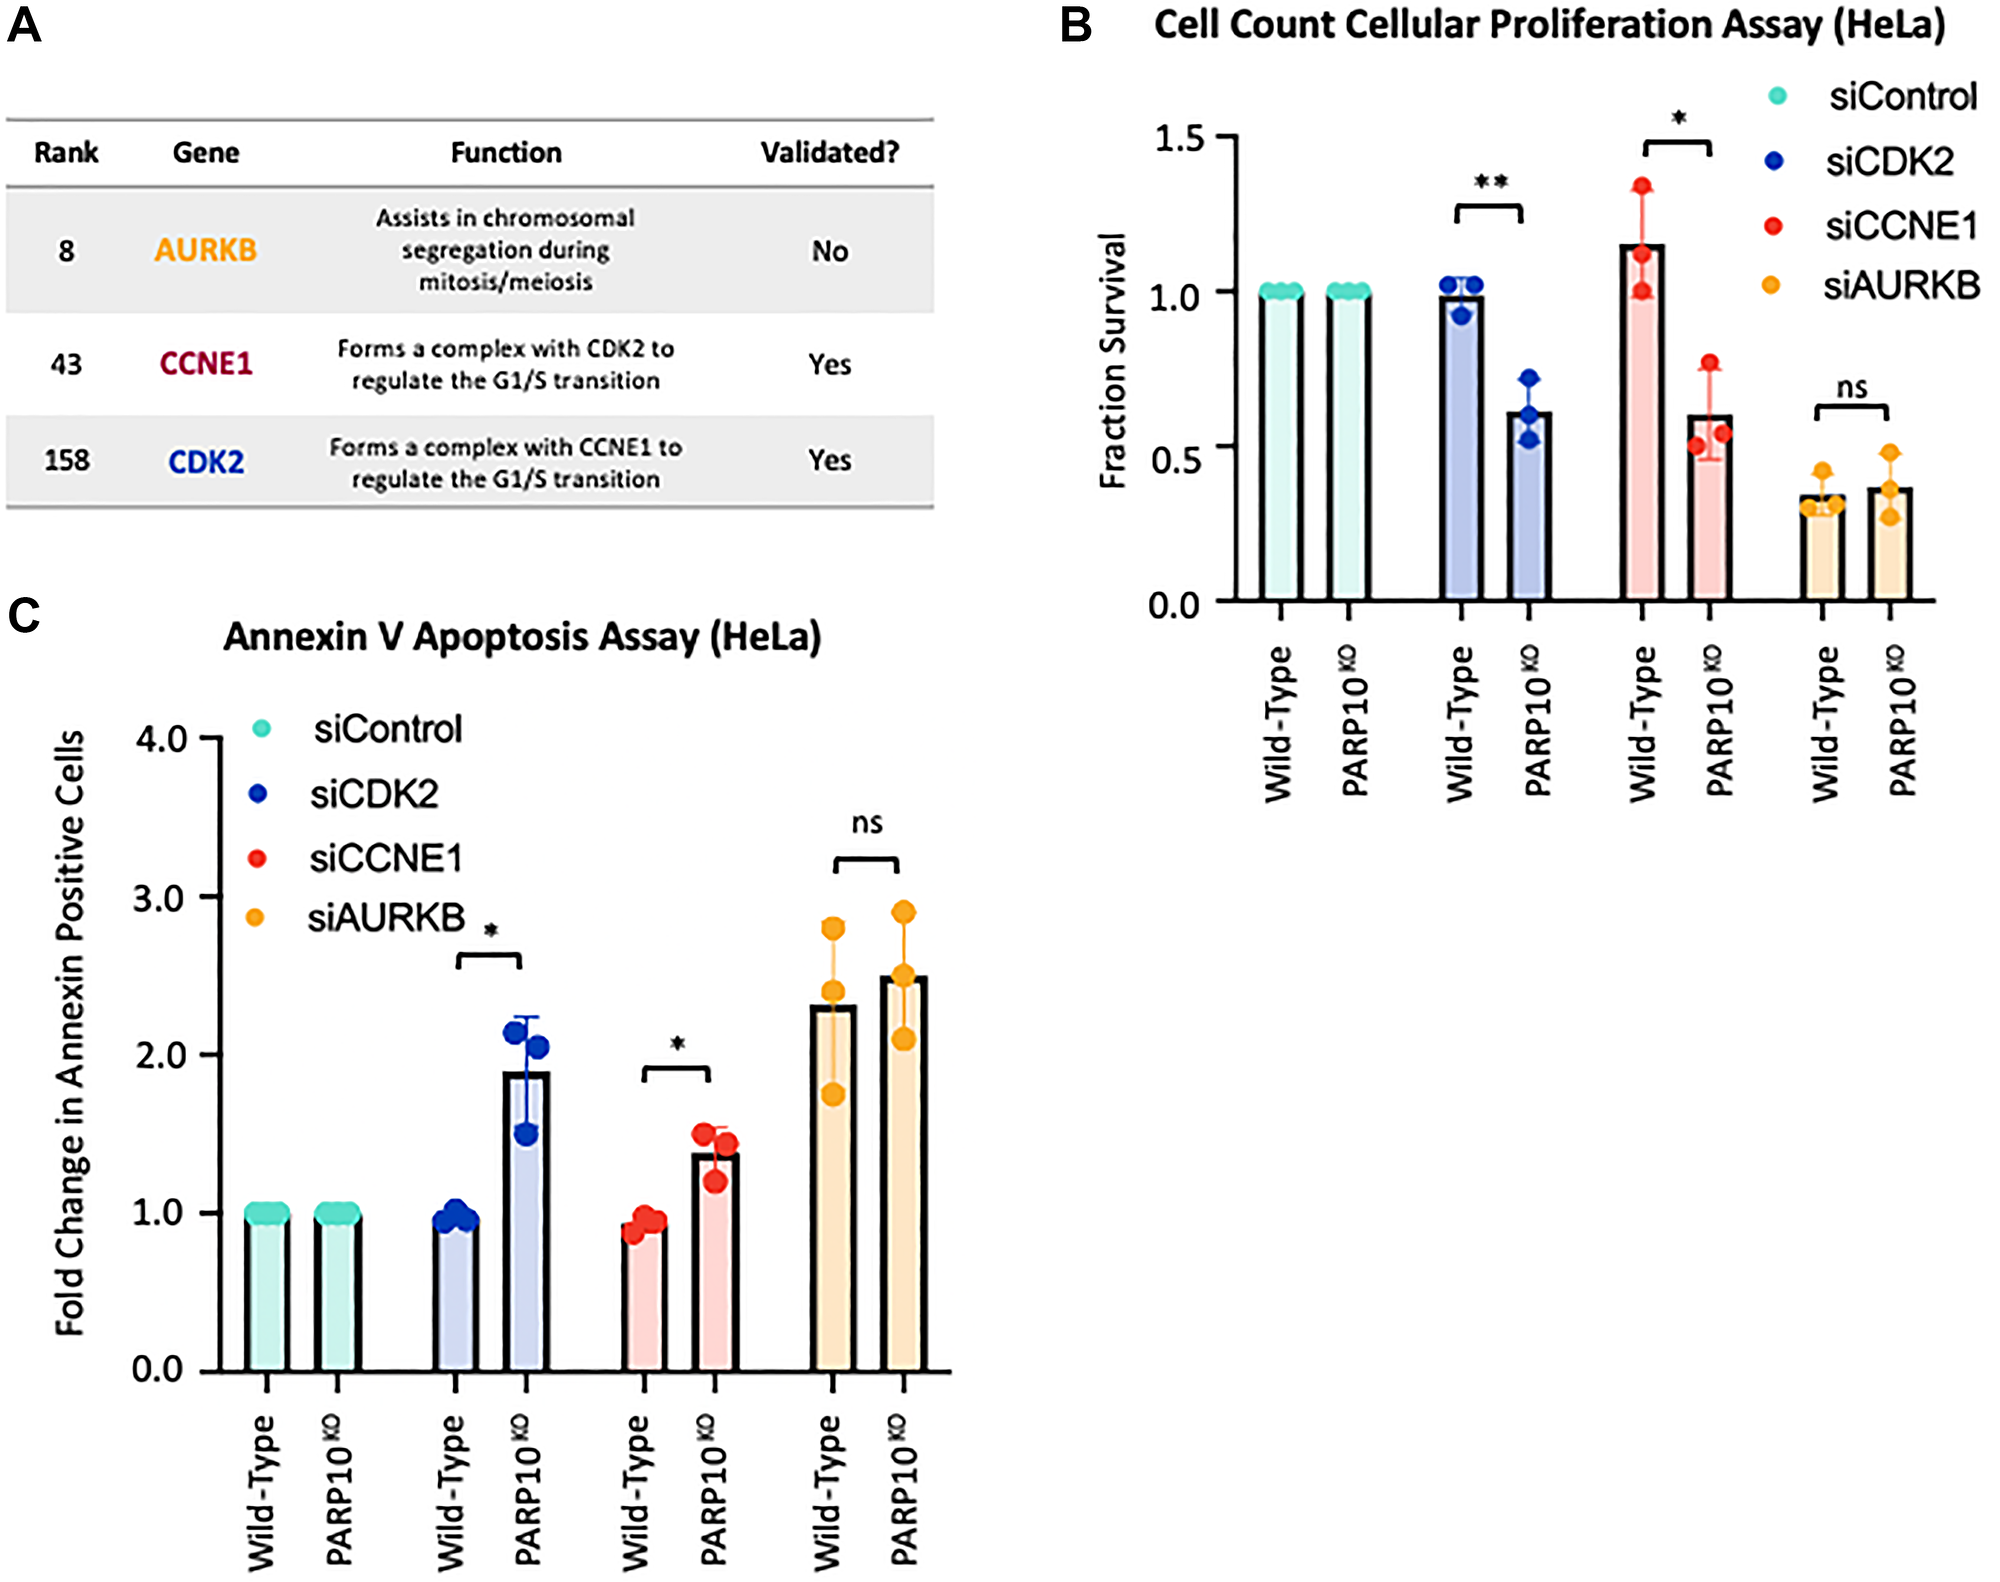 Validation of the top hits from the CRISPR screen for genetic determinants of proliferation of PARP10-knockout cells.